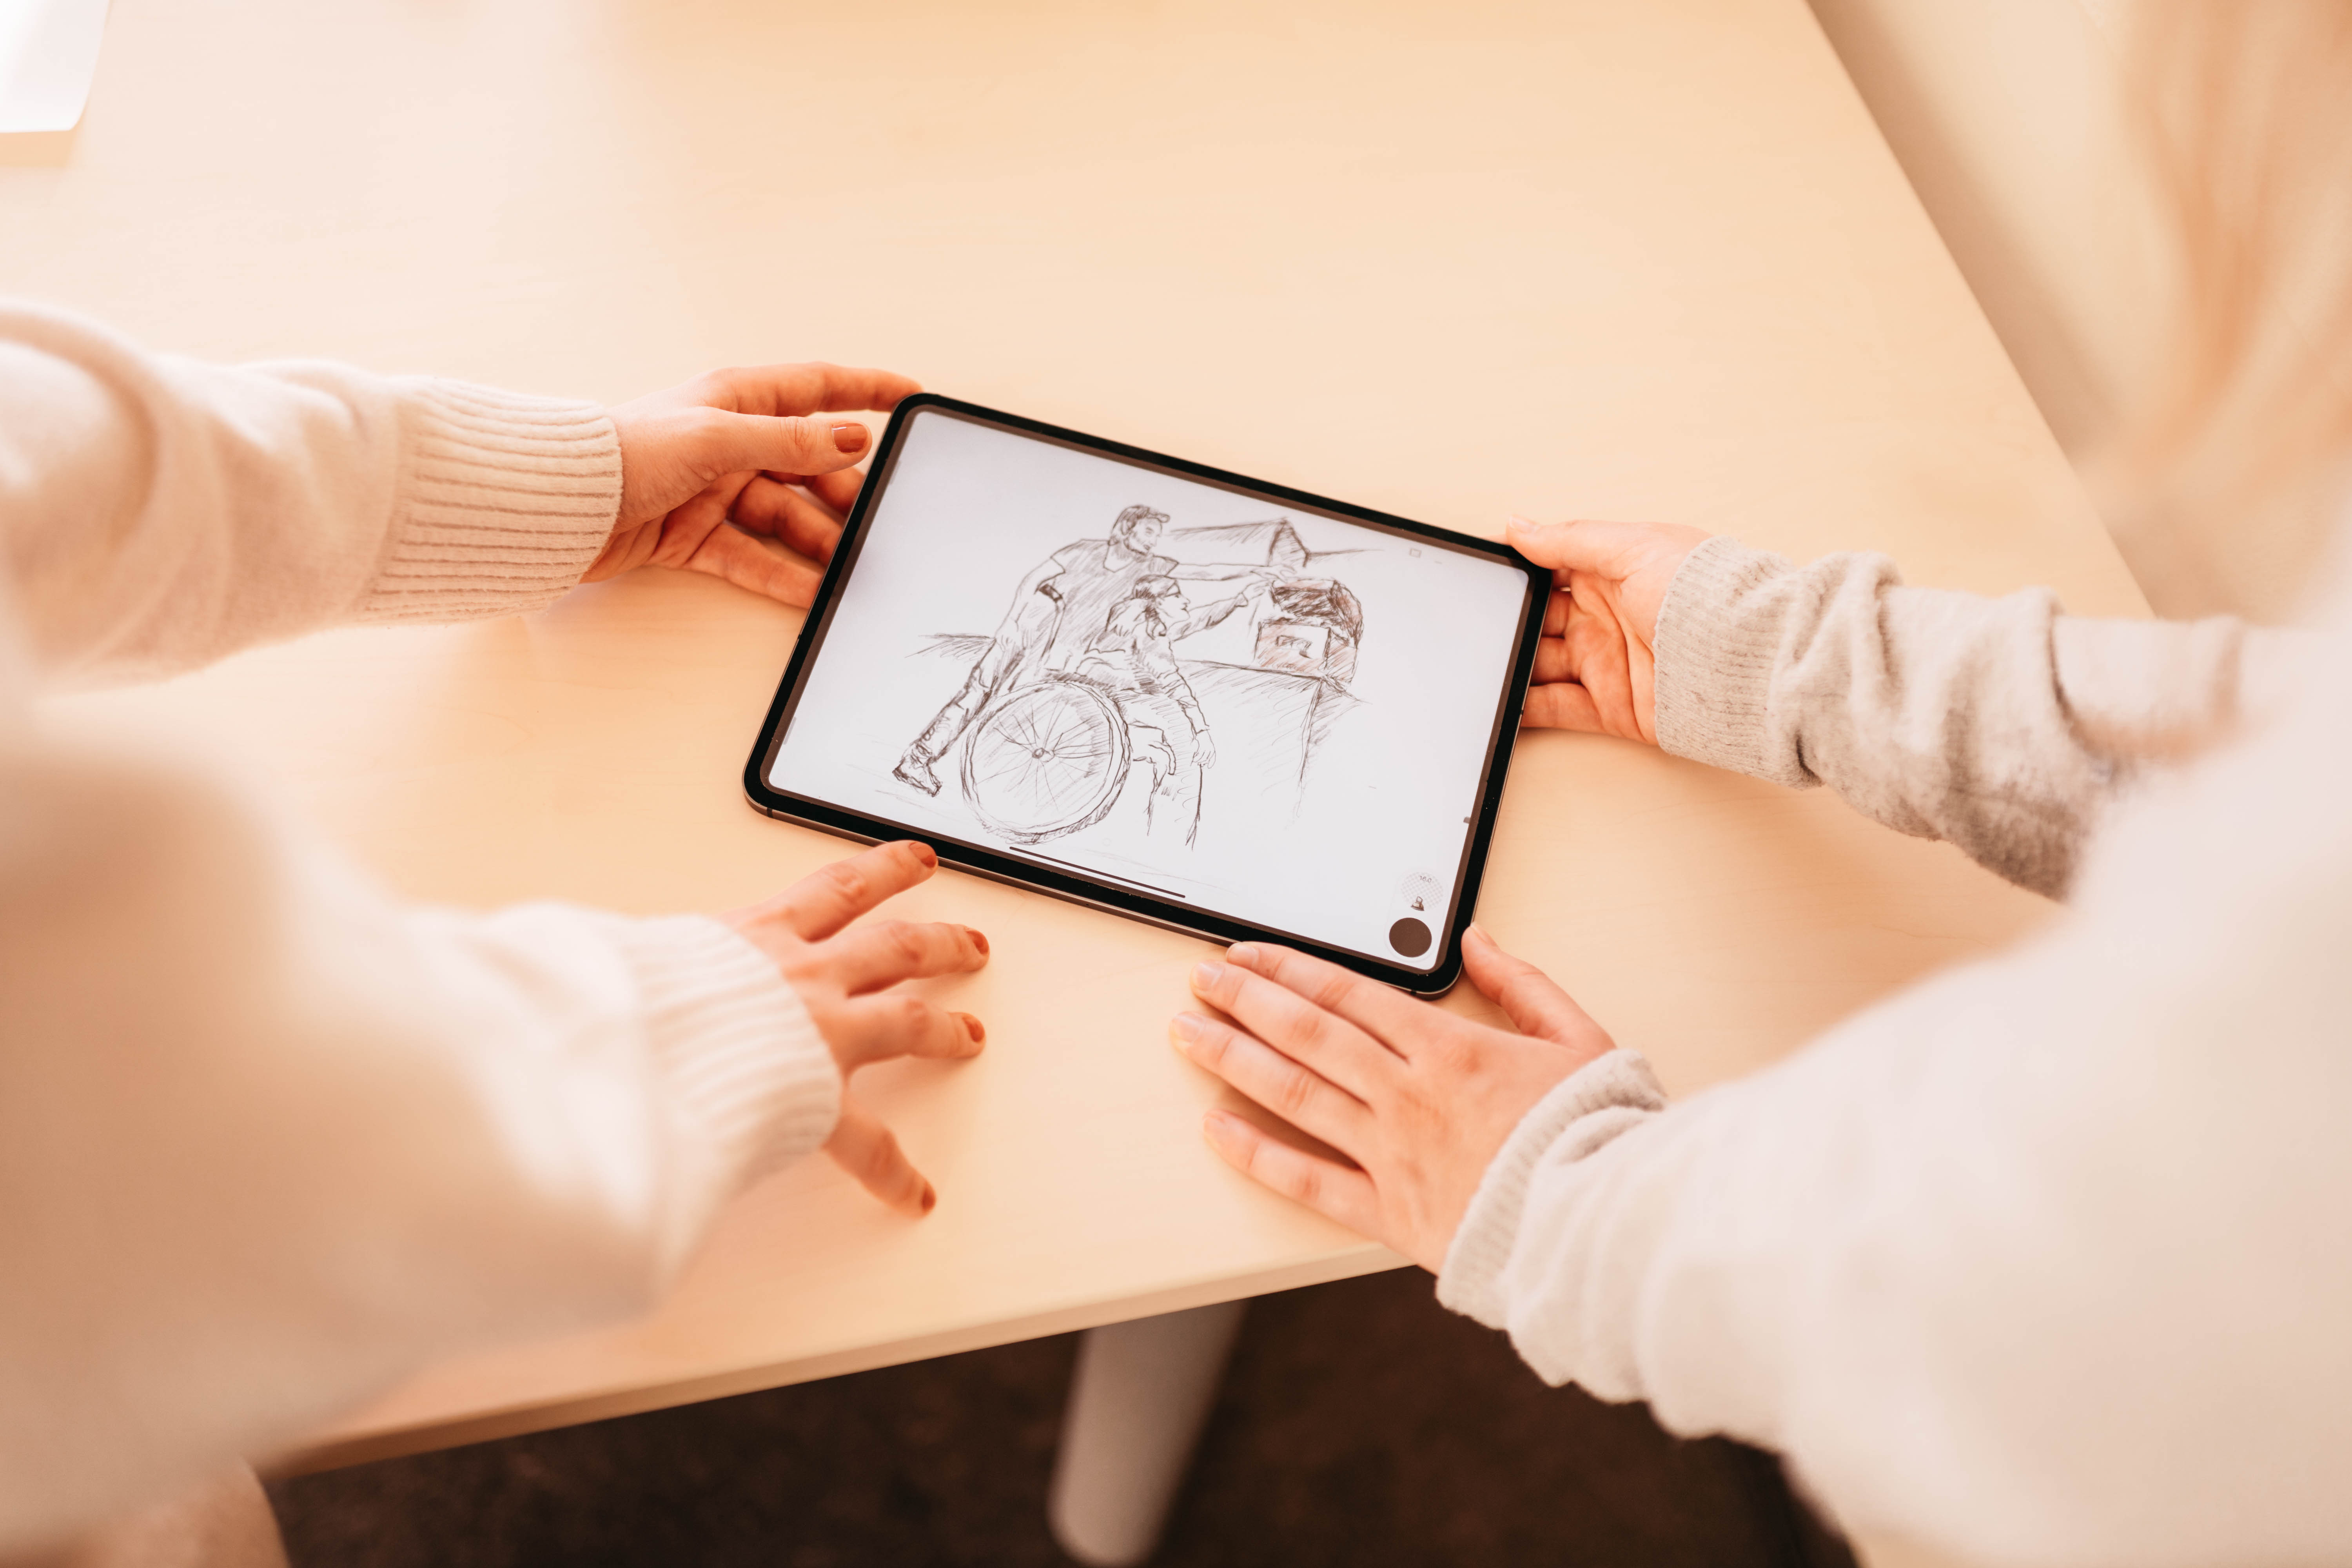 two people hold an iPad with a drawing on it